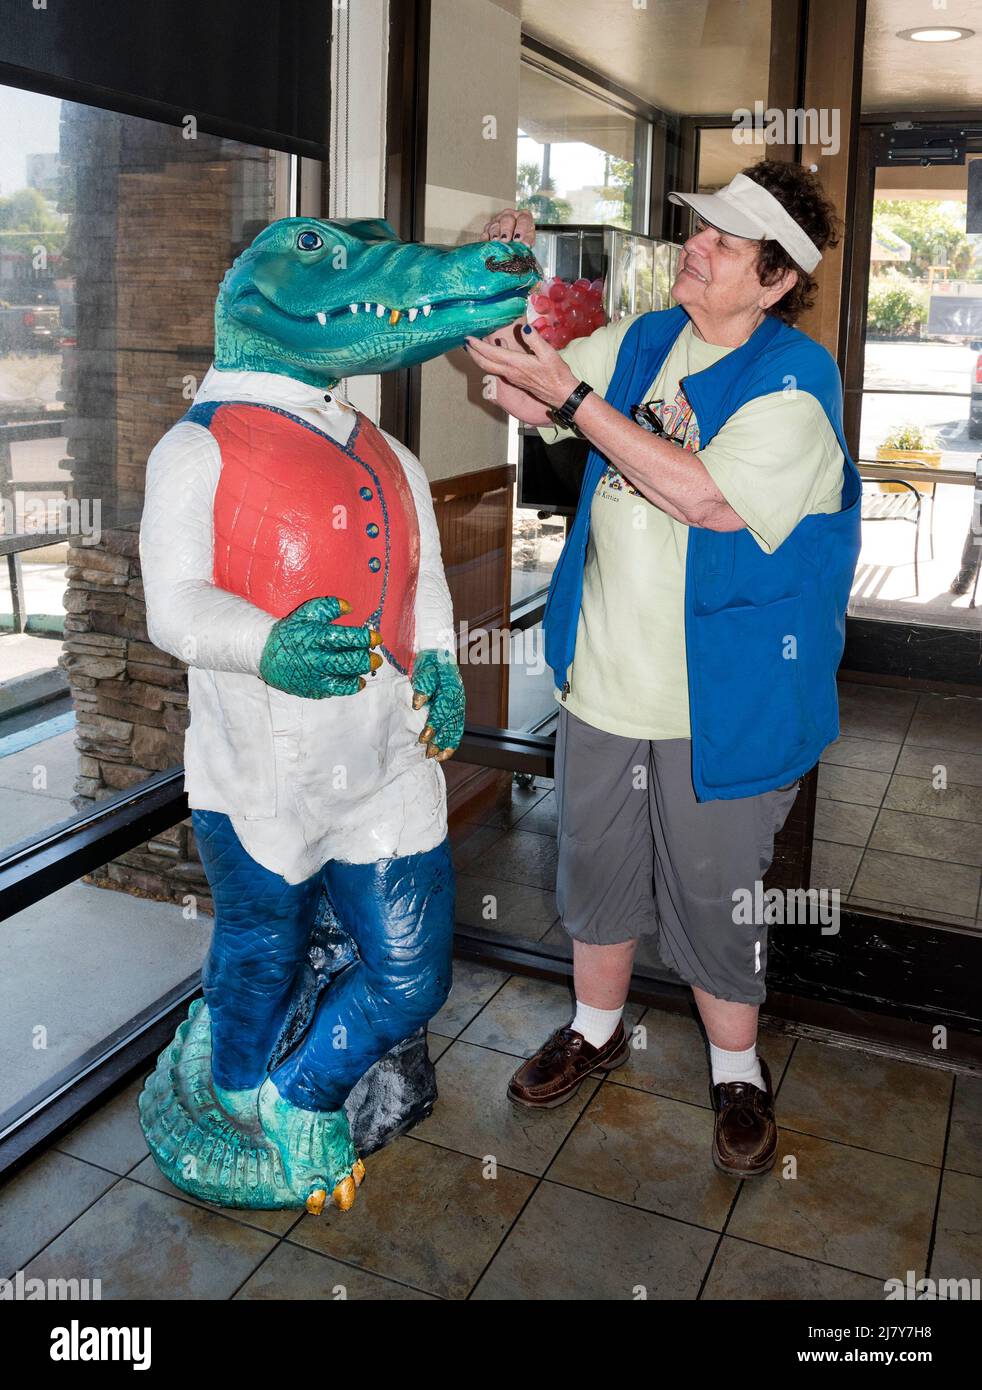 Life size alligator in a restaurant in Gainesville, Florida, home of the University of Florida 'Gators'. Stock Photo